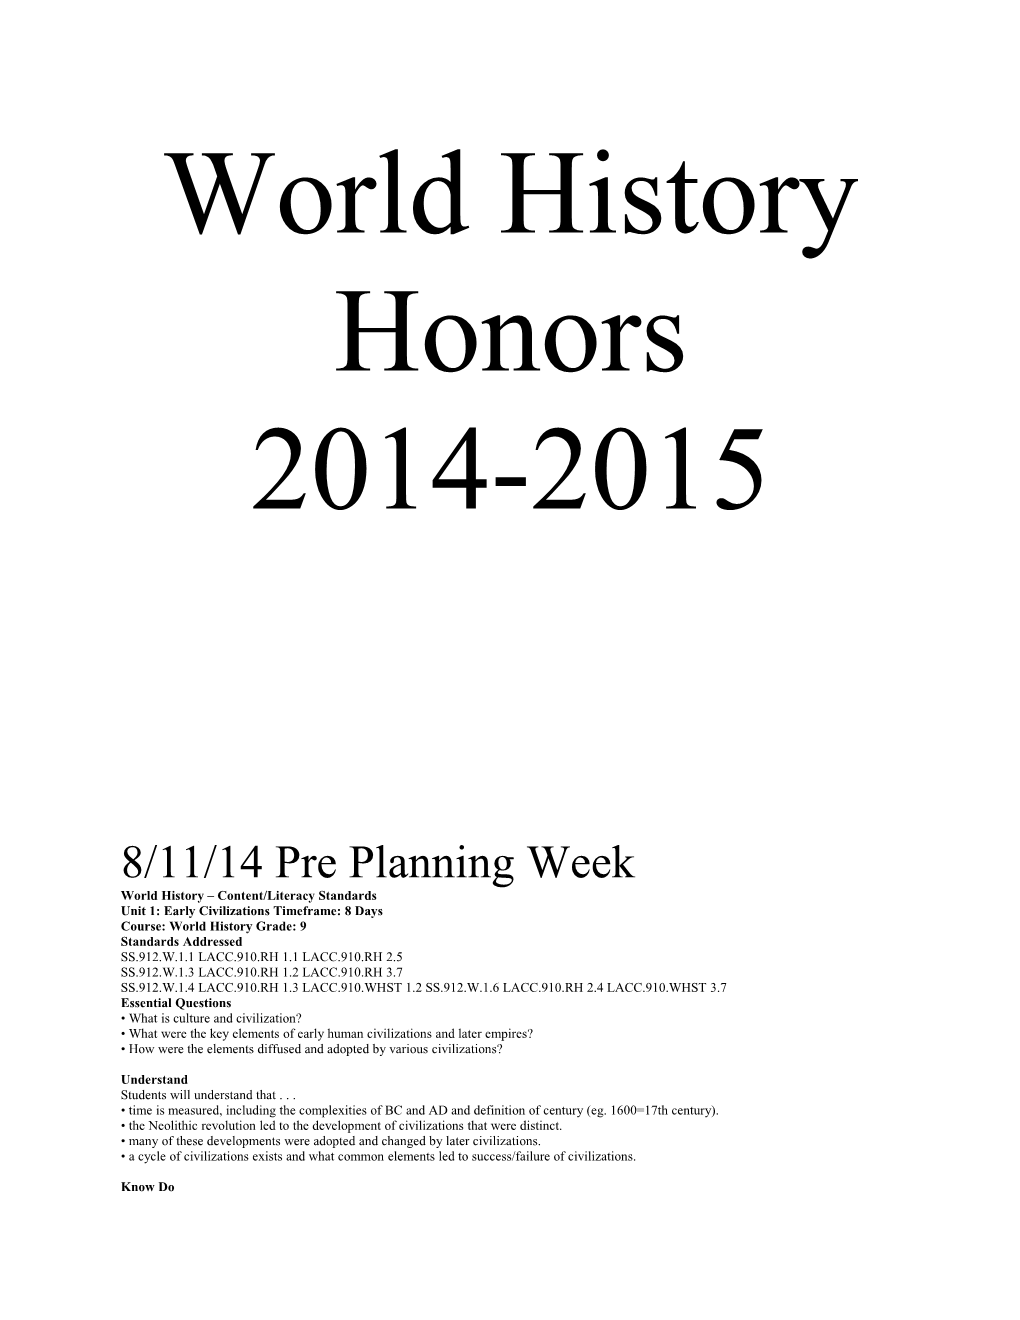 World History Content/Literacy Standards